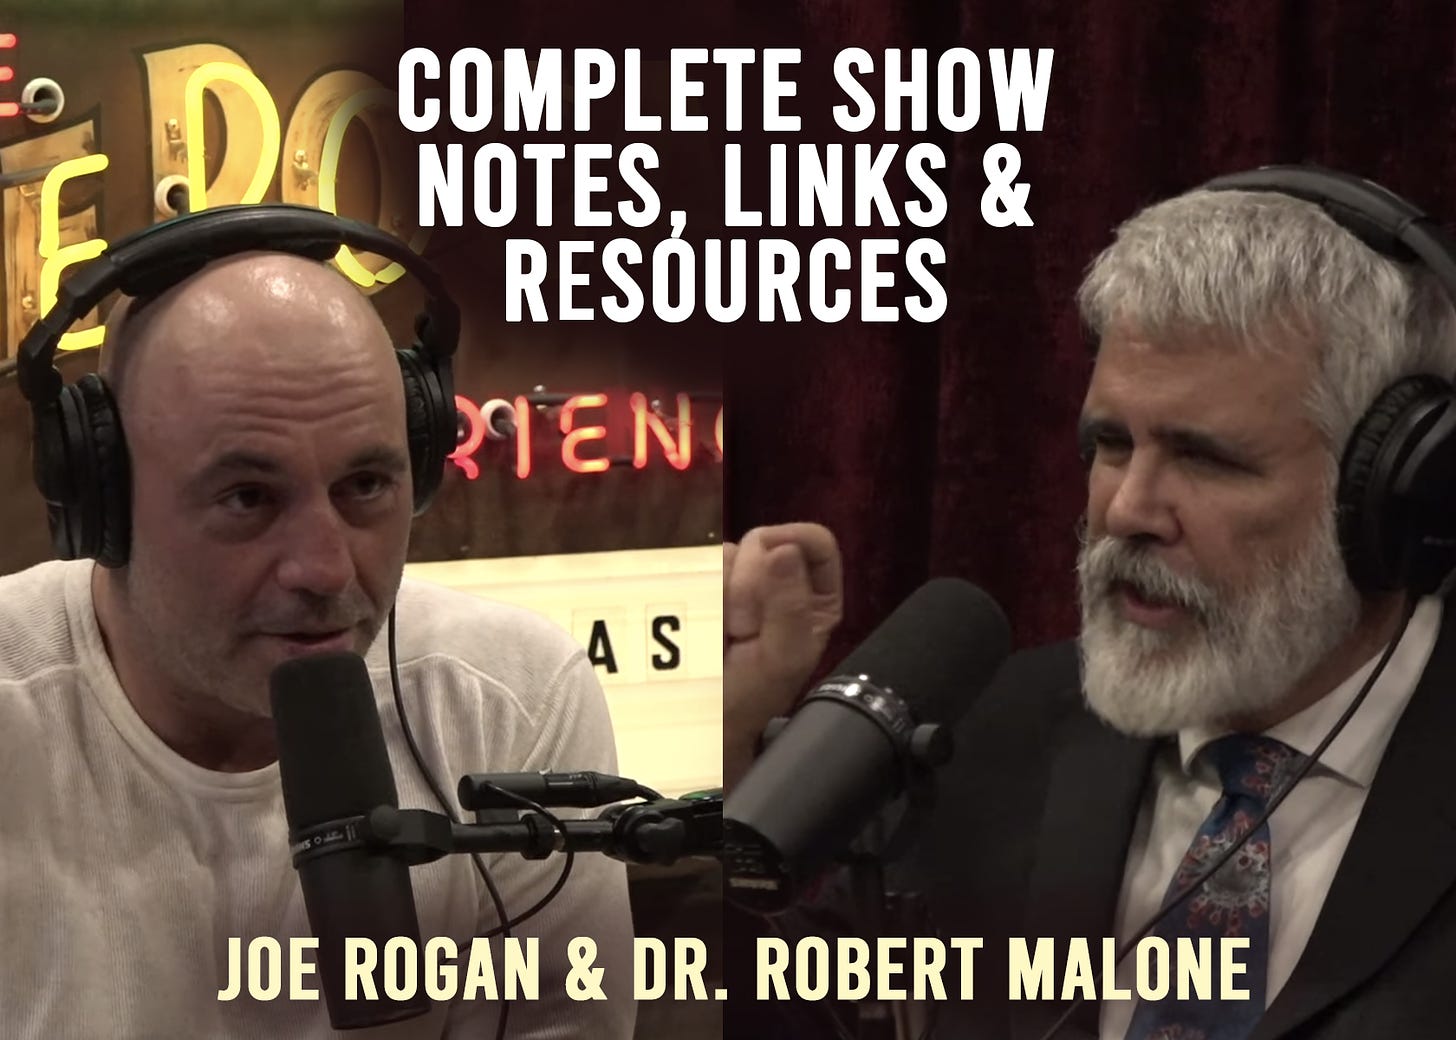 Dr. Robert Malone Joe Rogan show notes links sources fact checked